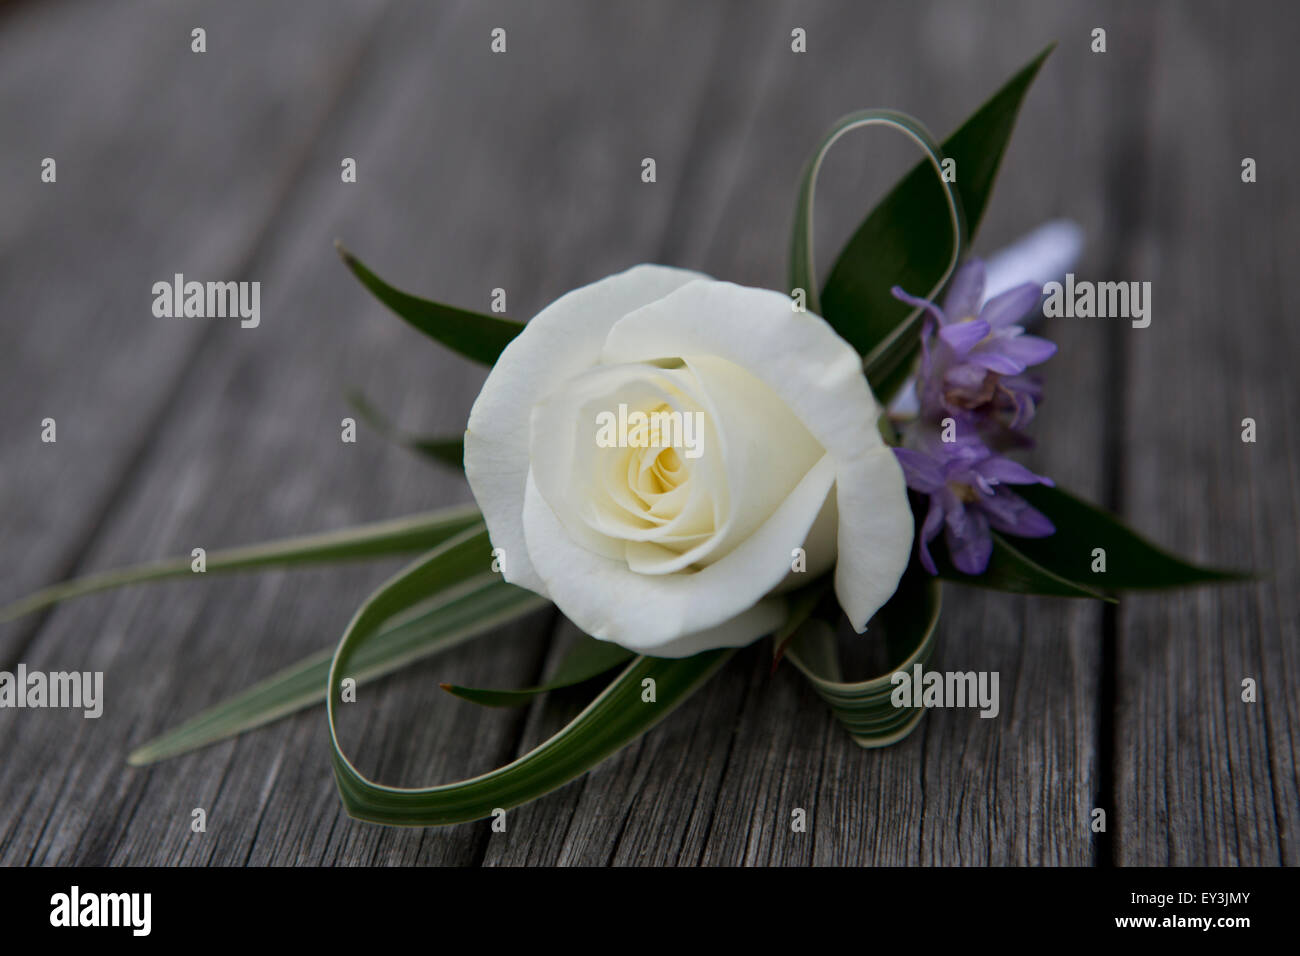 A boutonniere, button hole flower, white rose. Stock Photo